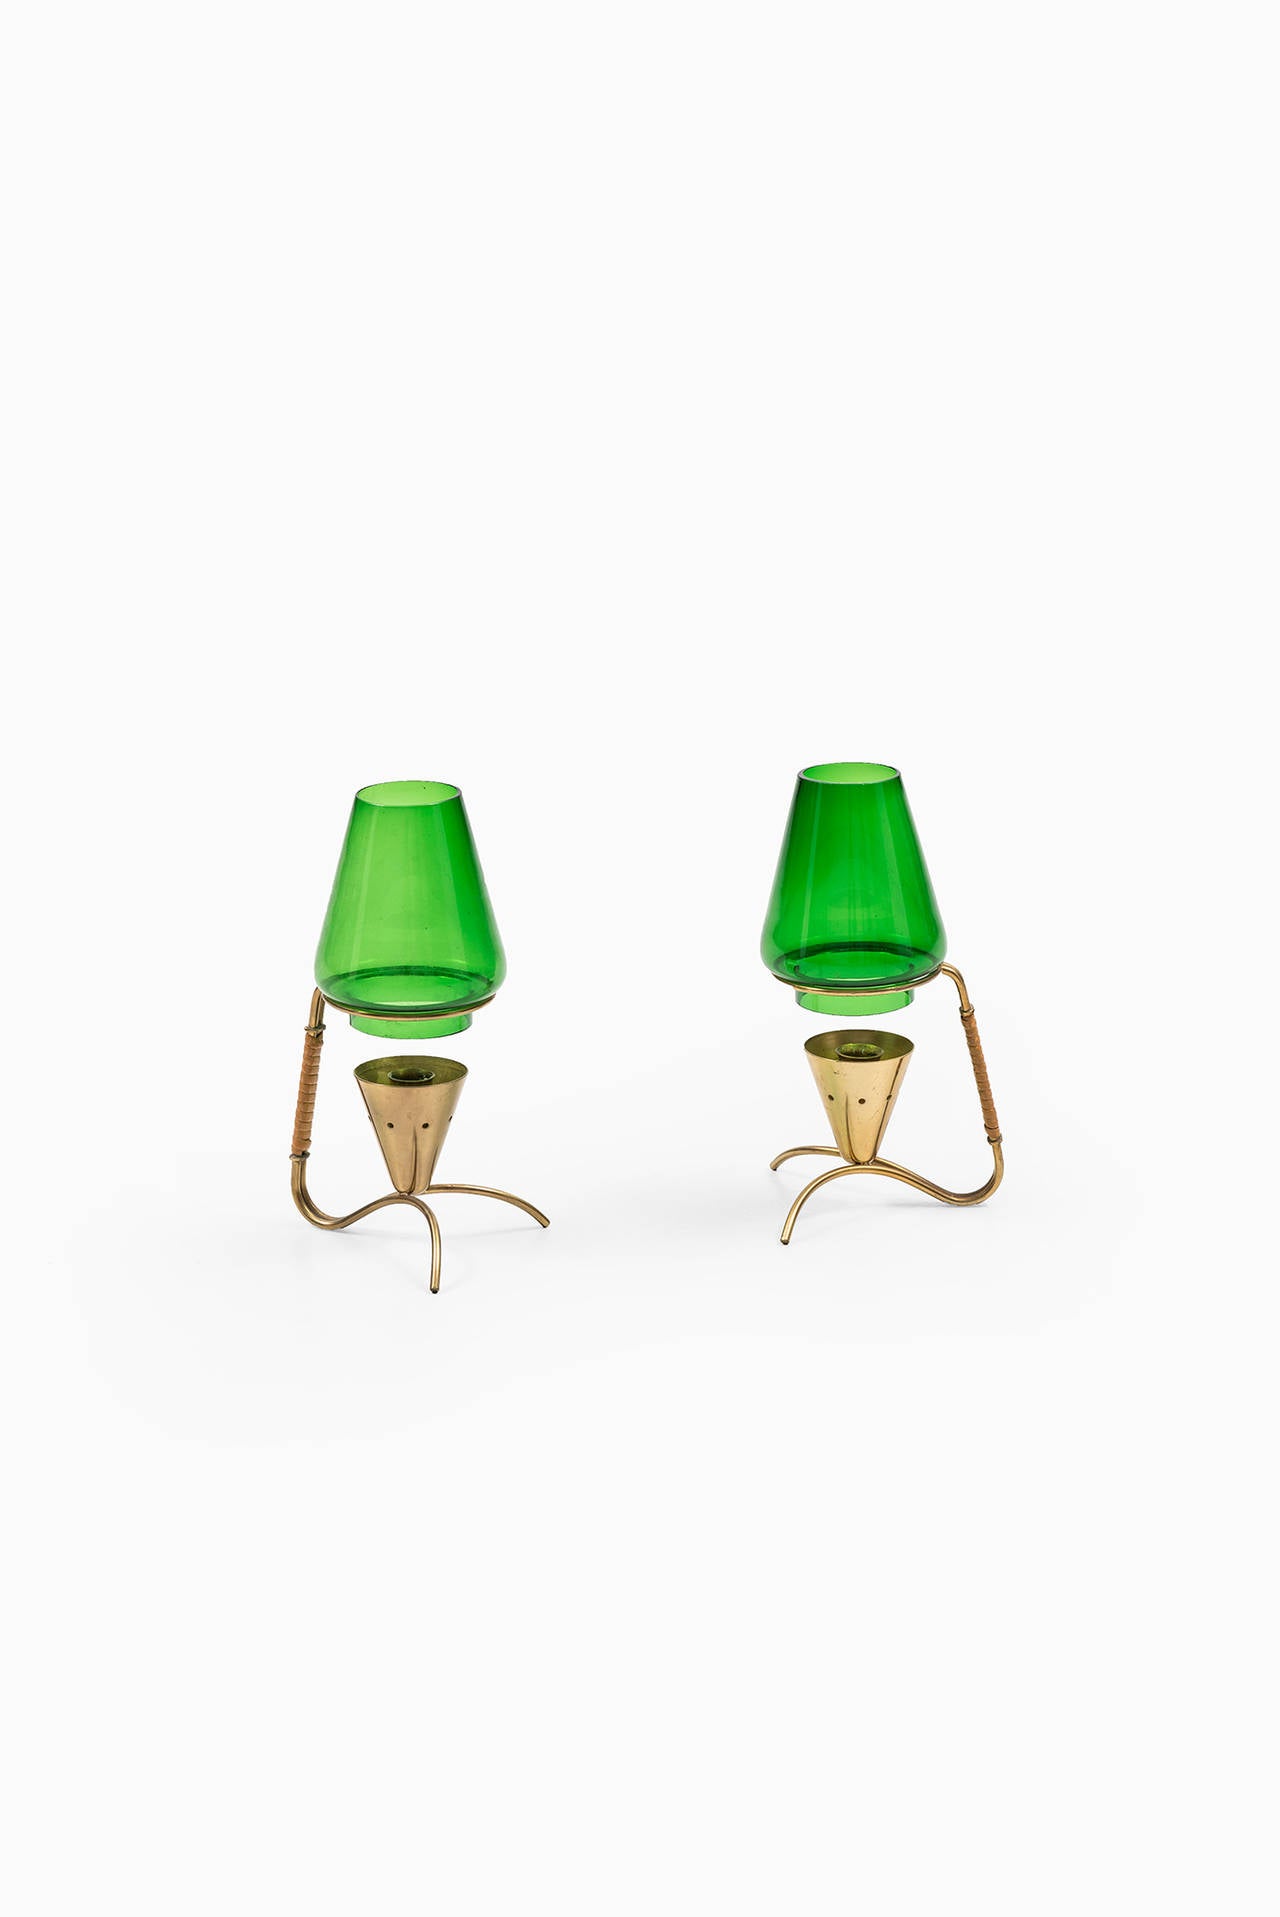 A rare pair of candlesticks in brass, with cane detail and green glass designed by Gunnar Ander. Produced by Ystad metall in Sweden.